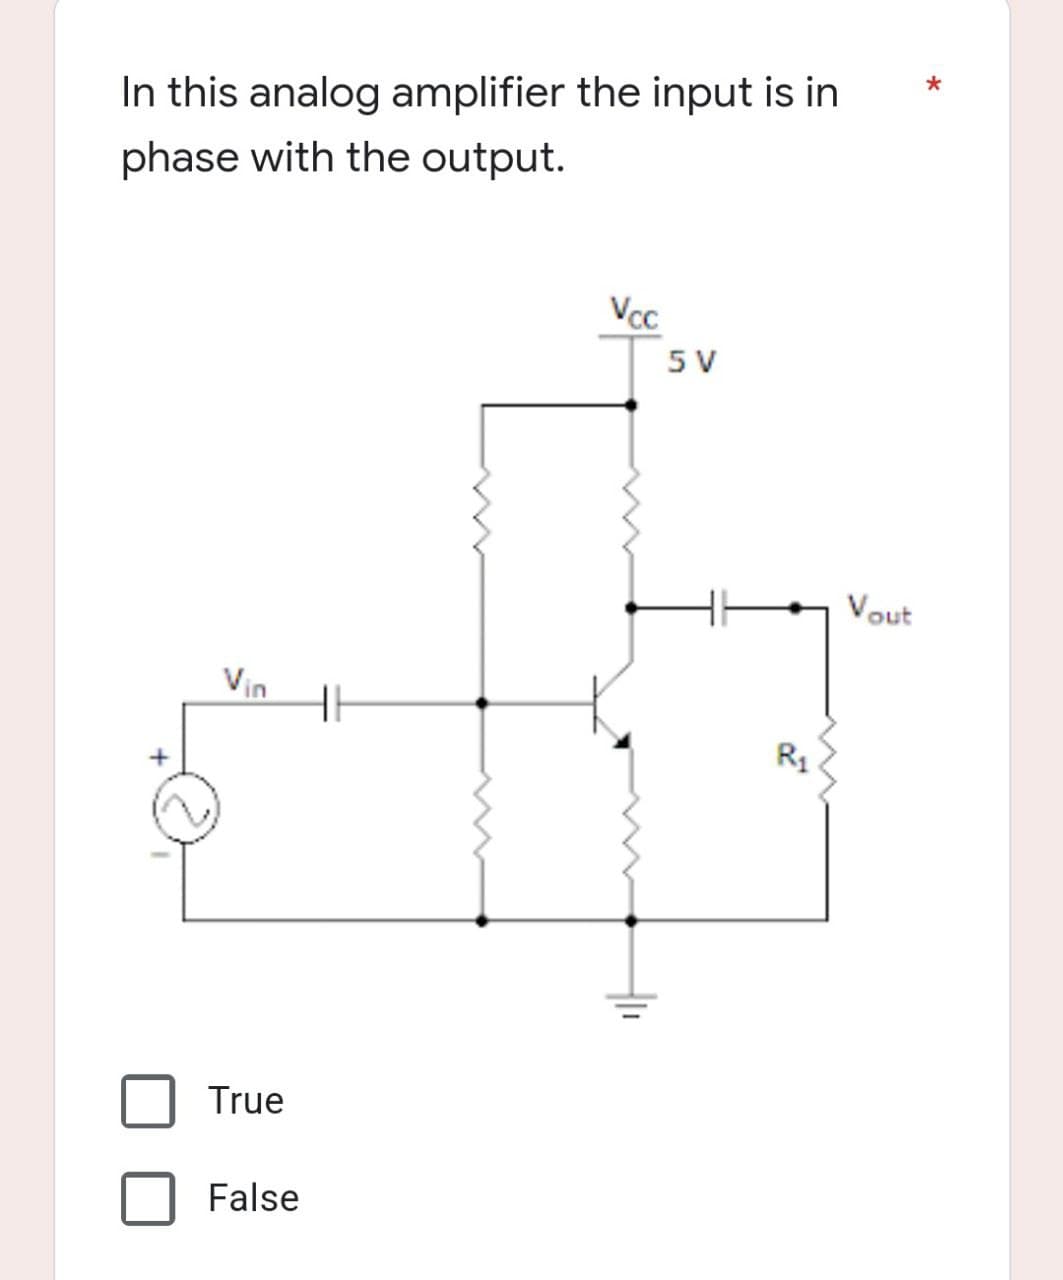 In this analog amplifier the input is in
phase with the output.
Vcc
Vin
True
False
5 V
R₁
Vout
*